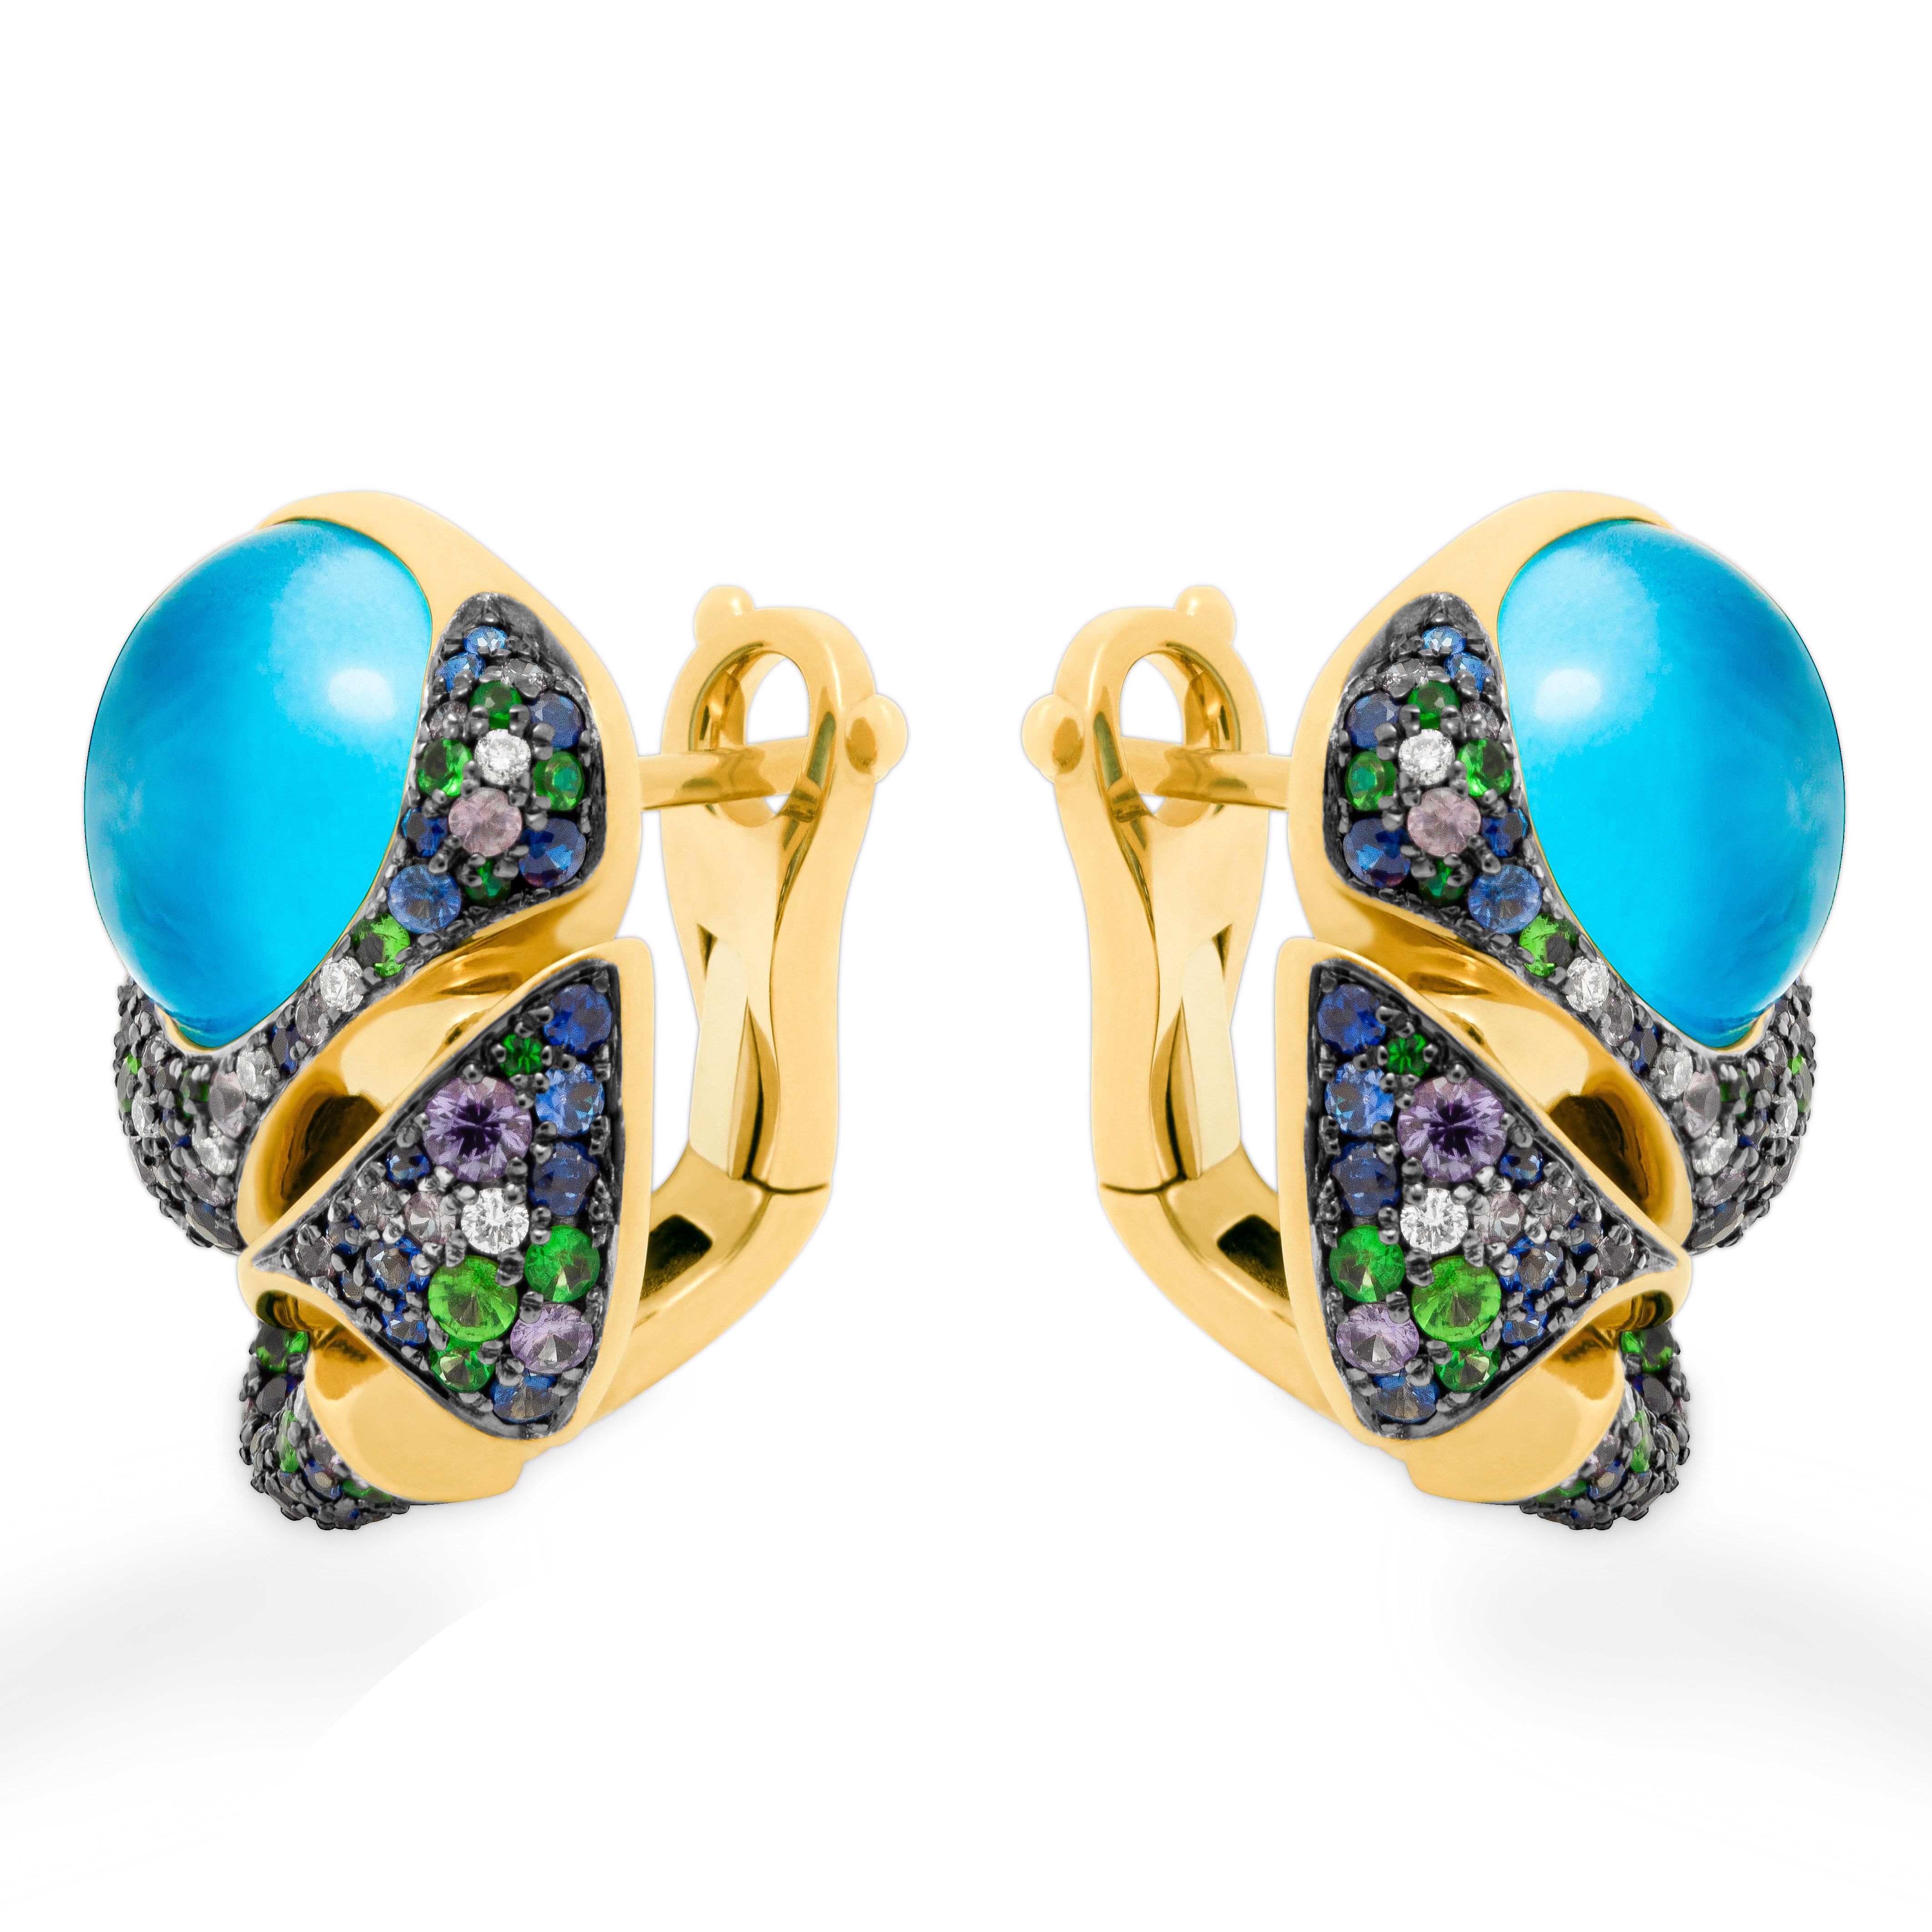 Swiss Topaz 9.67 Carat Tsavorite Diamonds Sapphire 18 Karat Yellow Gold Earrings
All the colors of hot summer are collected in our Earrings. Bright 40 tsavorites, 56 Purple, and 74 Blue Sapphires, 20 Diamonds, and a mixture of 18 Karat Yellow and